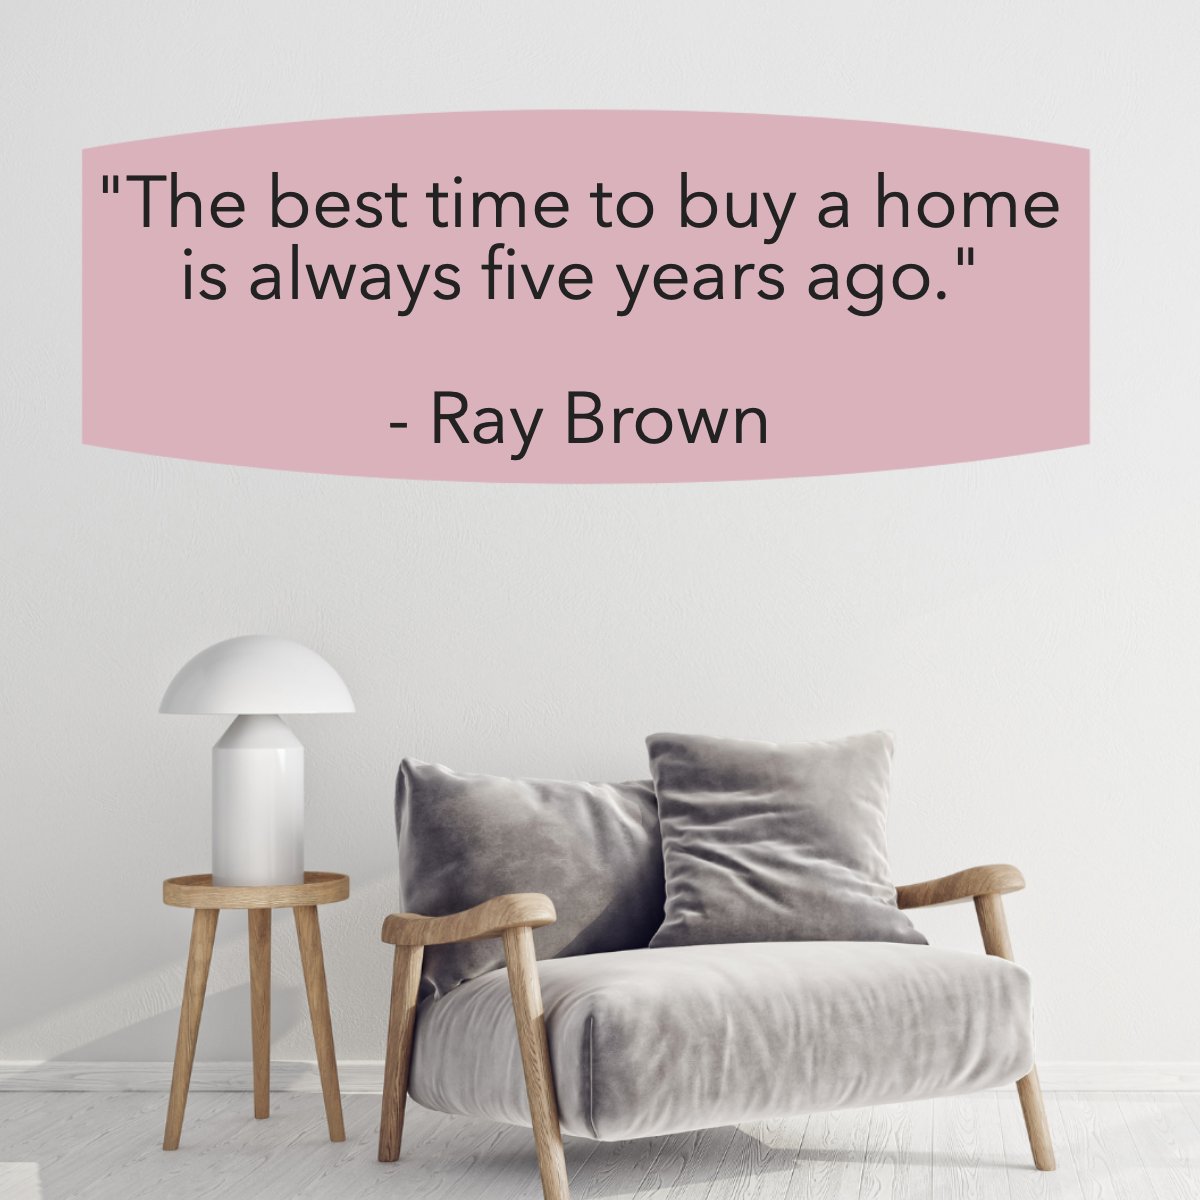 'The best time to buy a home is always five years ago'
― Ray Brown 📖

#home    #homesale    #hometime    #besttimetobuy    #quoteoftheday    #quotes    #raybrown
#premierrealestatenetwork #pren #realestate #realtor #barrettrealestate #bre #prescottquadcity